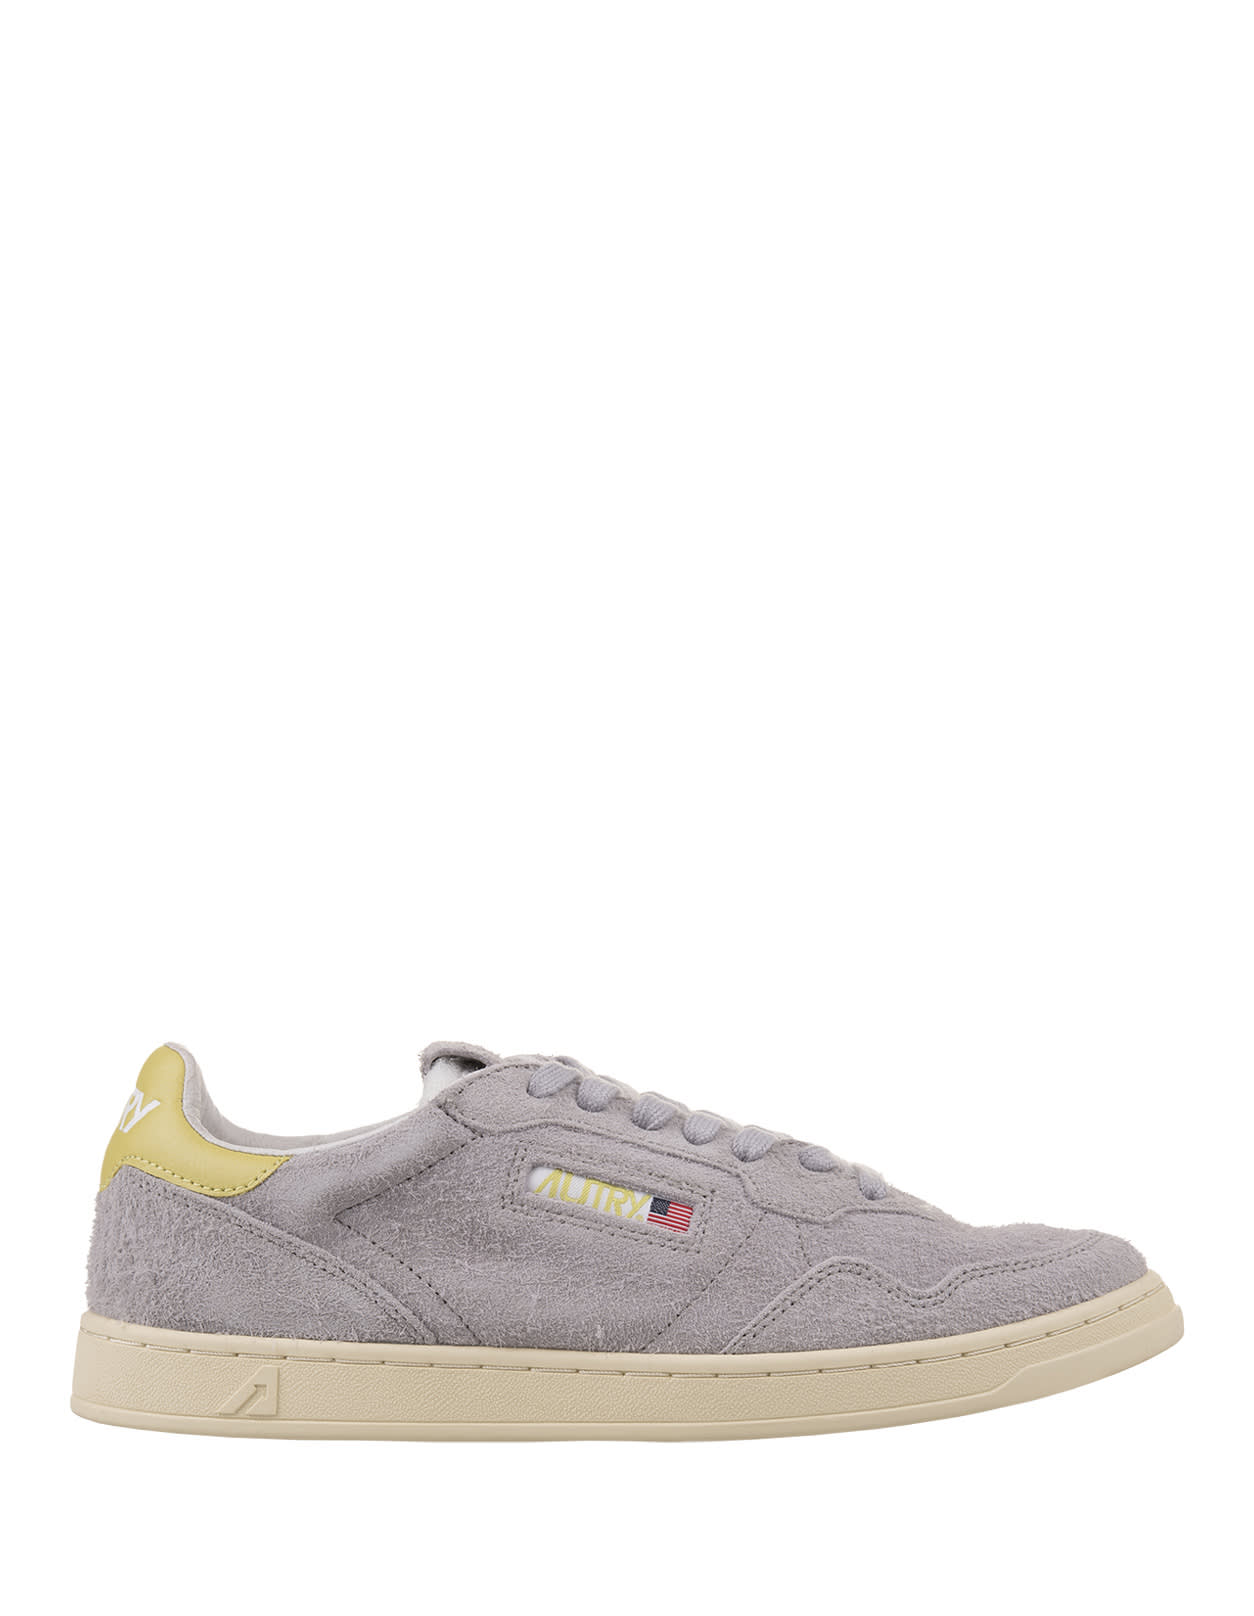 Autry Medalist Flat Sneakers In Grey And Yellow Suede